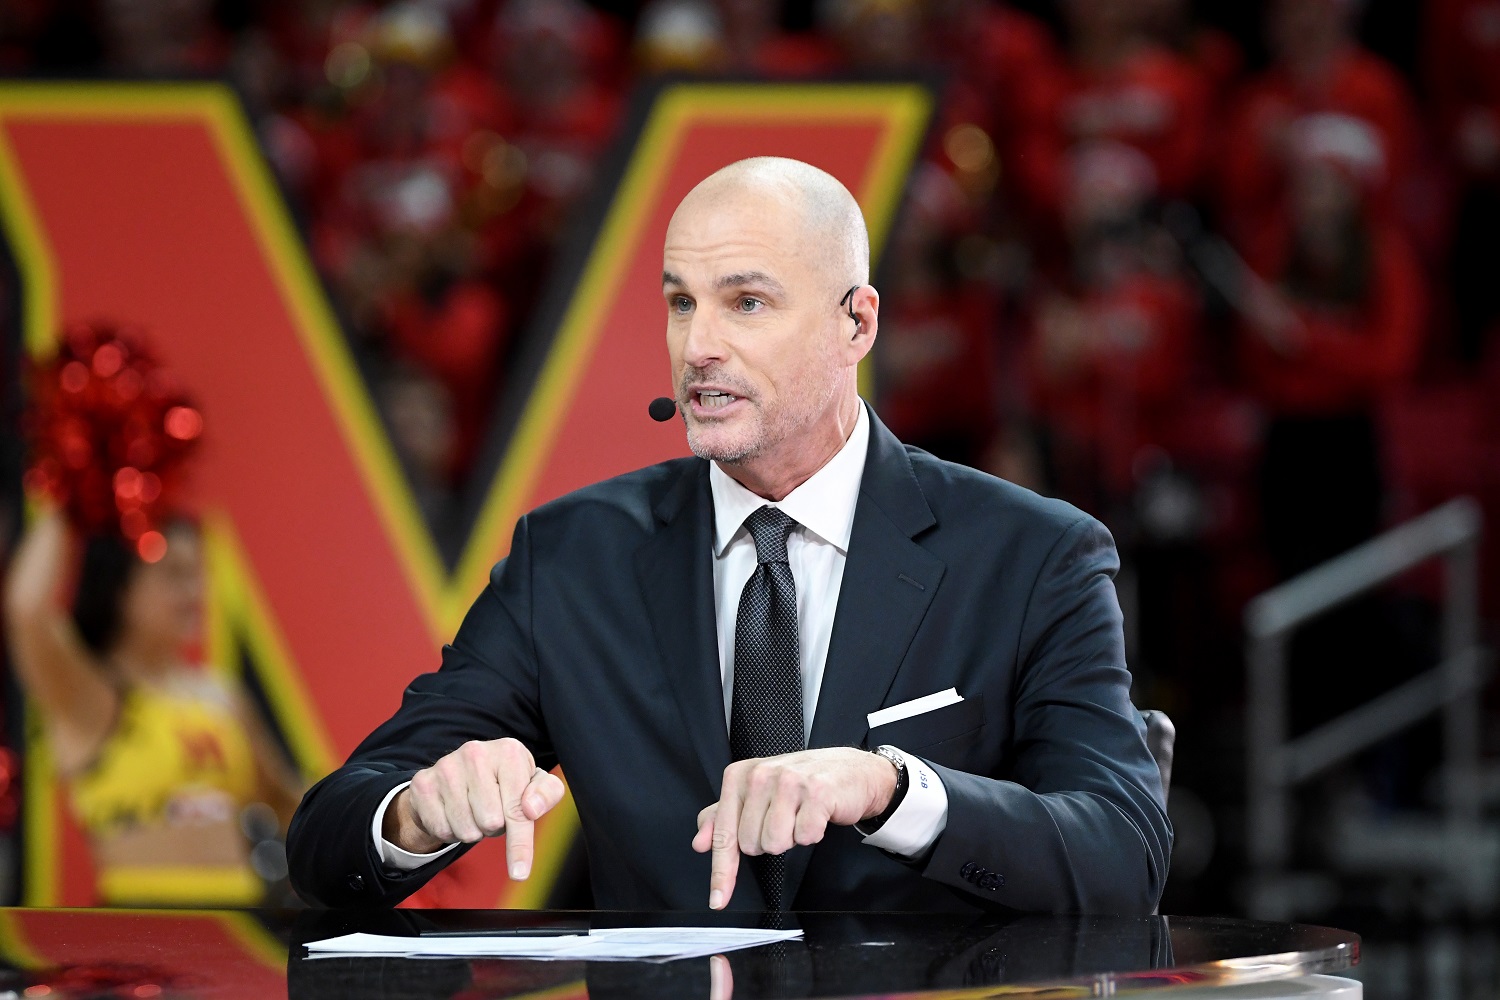 ESPN analyst Jay Bilas' criticism of Syracuse coach Jim Boeheim was unfair because it associated him with a racial issue.